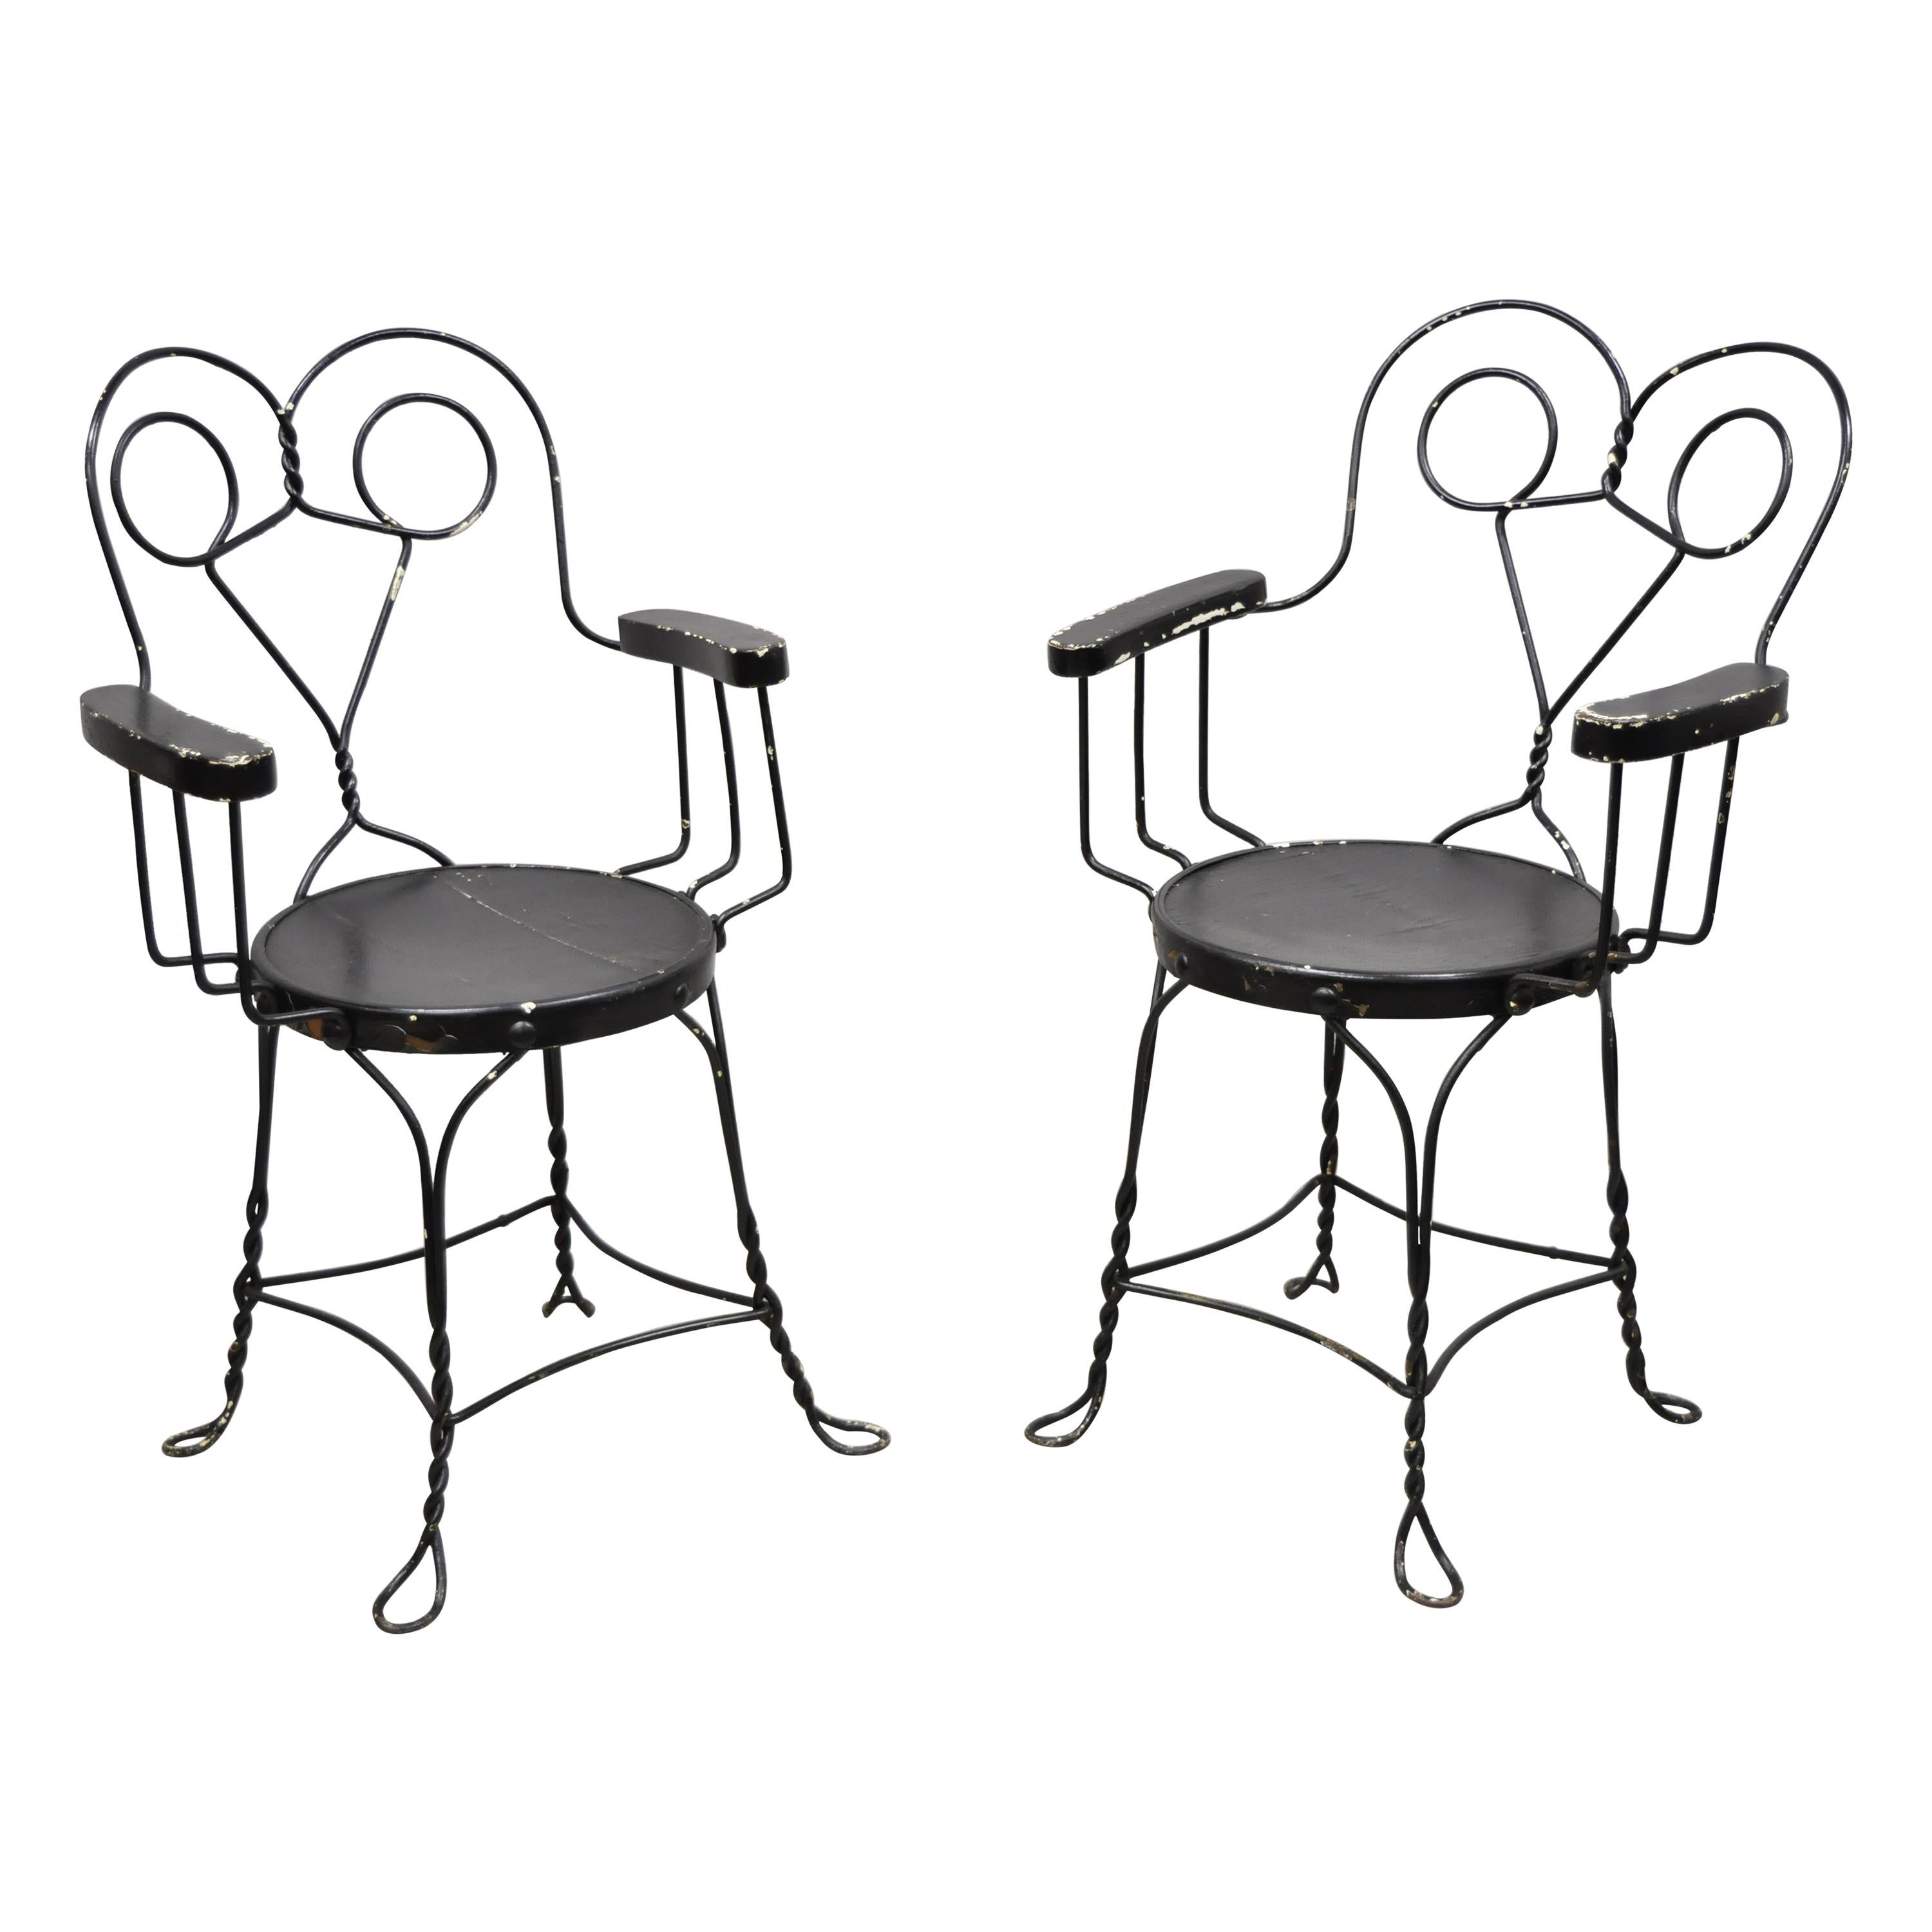 Antique Wrought Iron Twisted Metal Ice Cream Parlor Arm Chairs Wood Arms, Pair